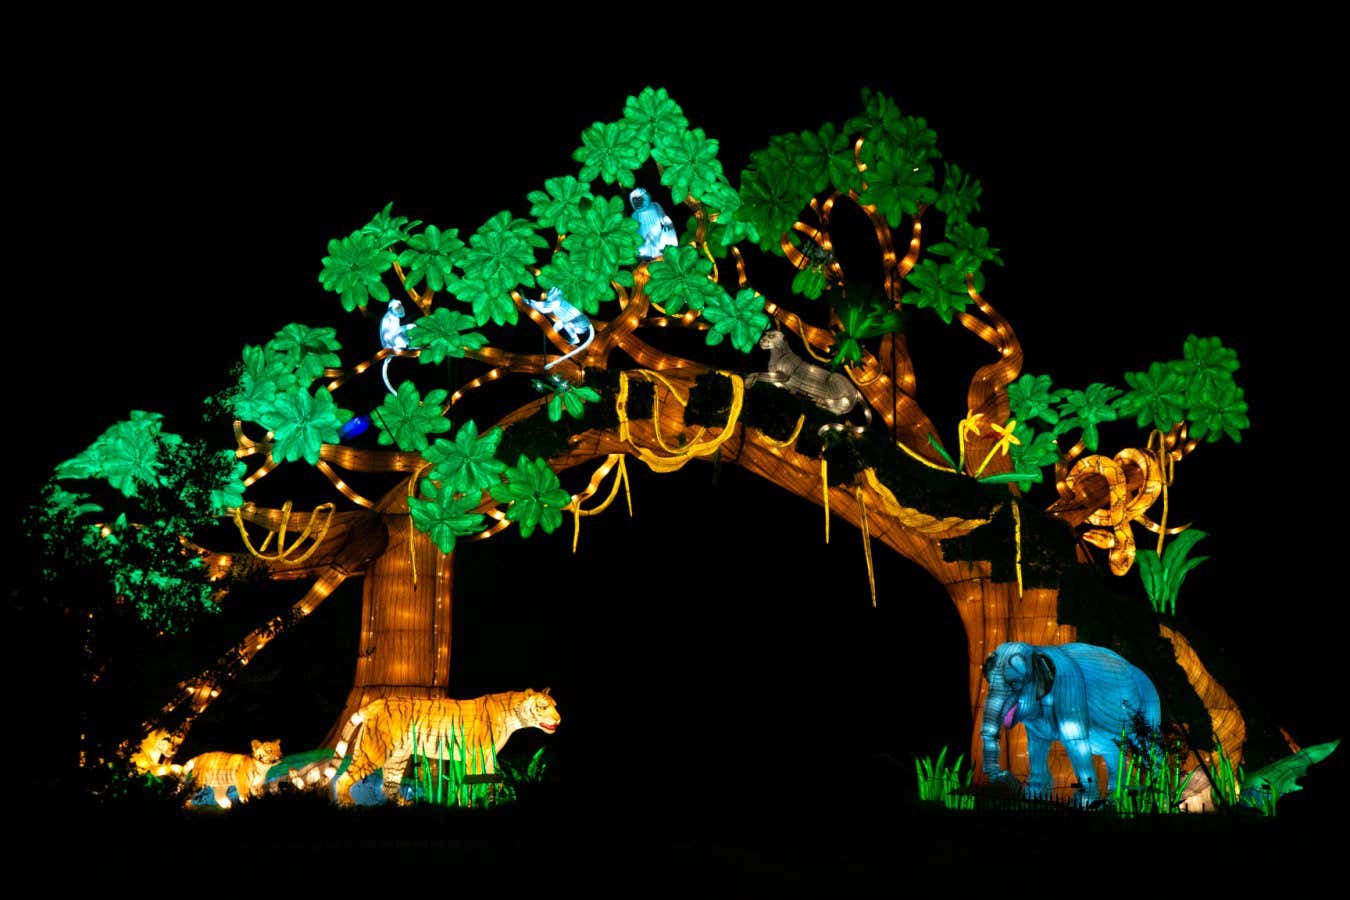 See the world’s tropical forests illuminated in stunning new show